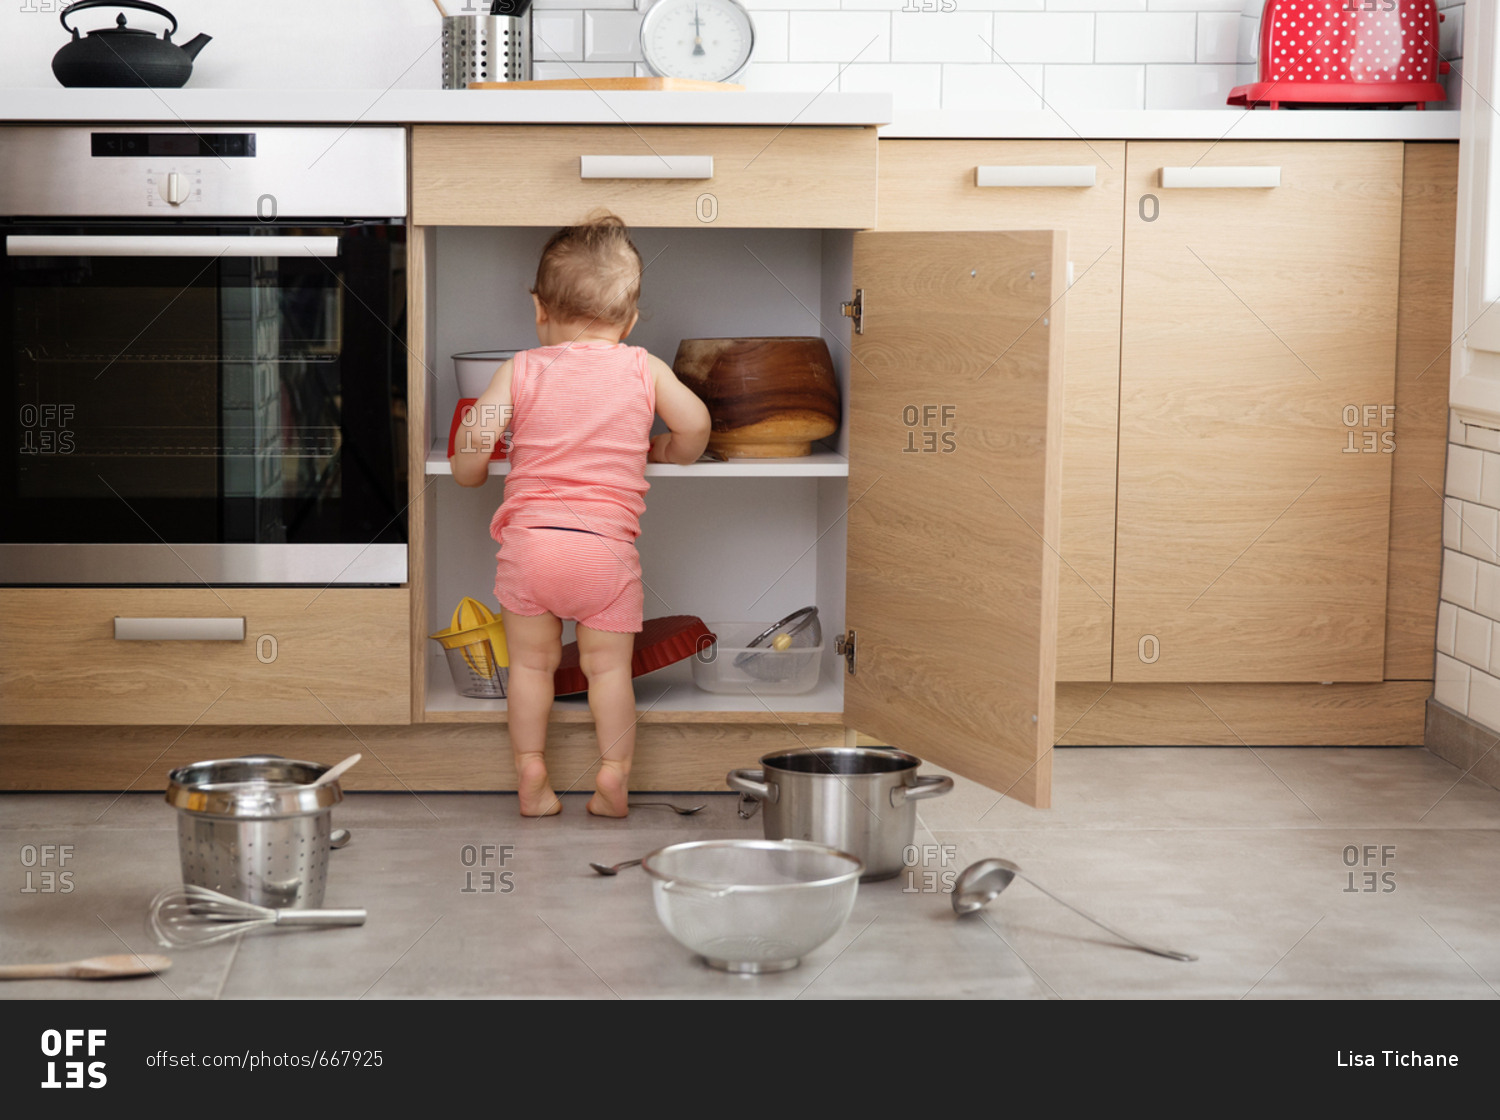 Rear view of baby making mess of kitchen cabinets